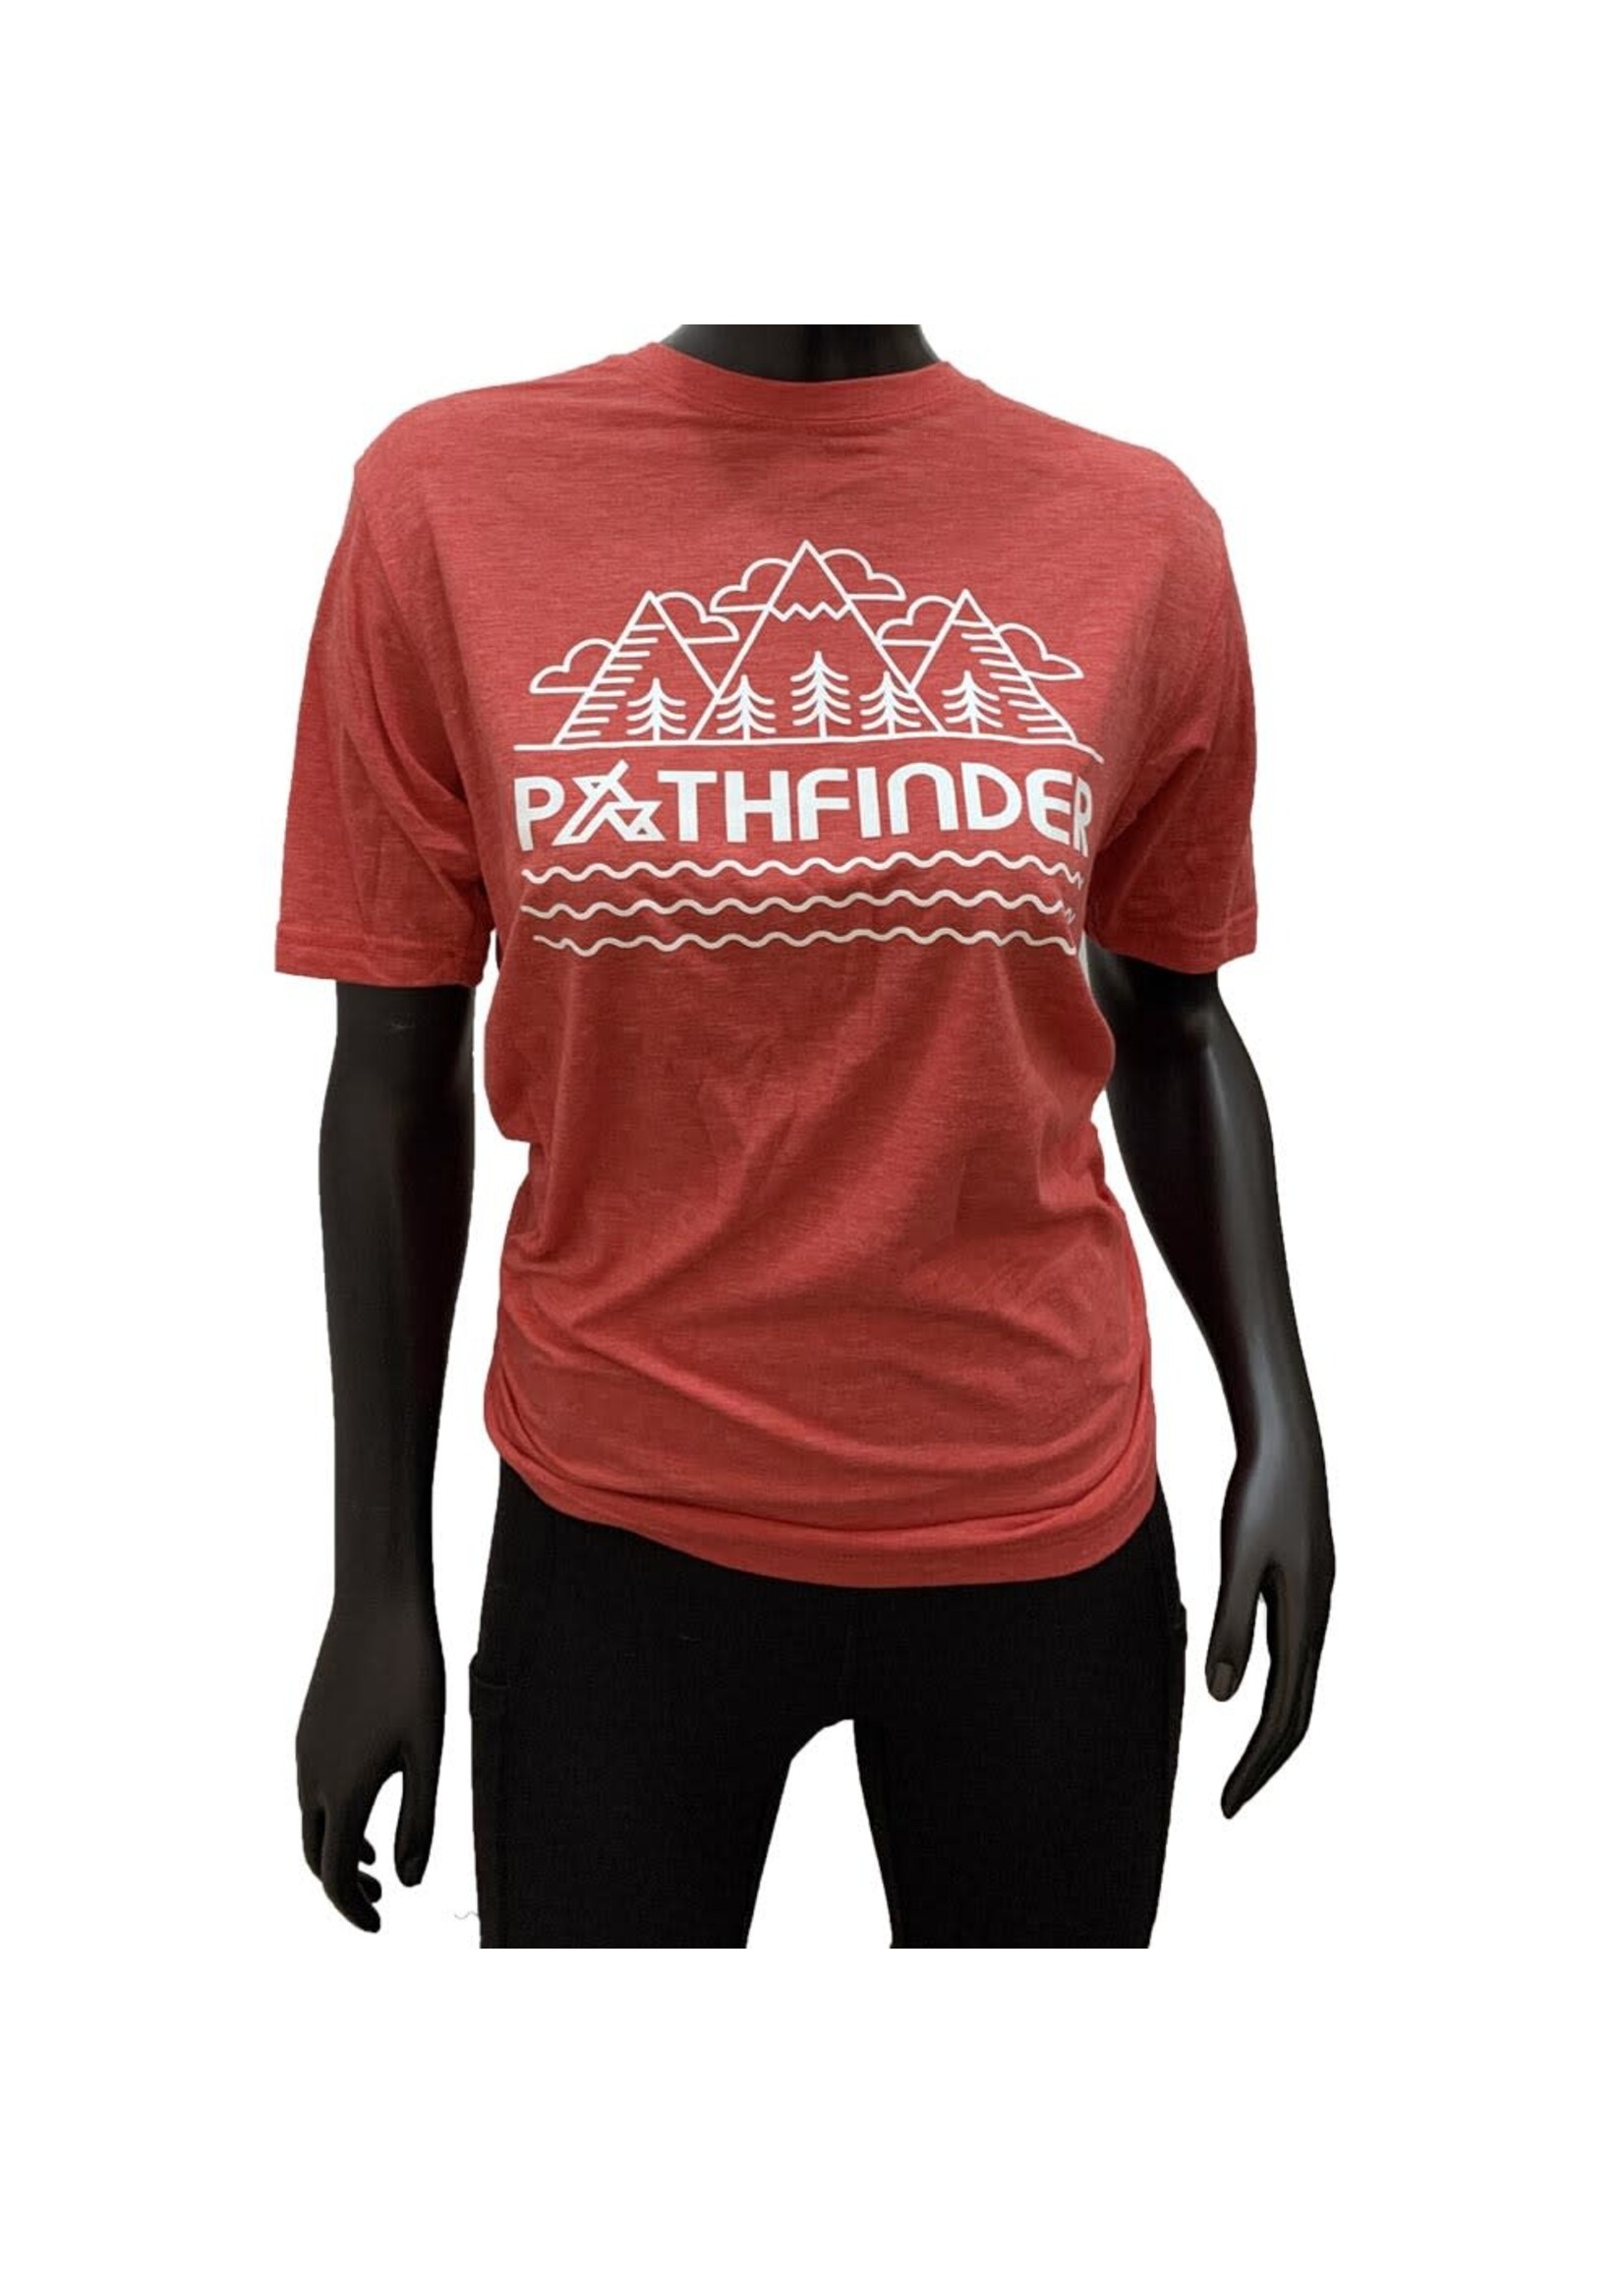 Pathfinder Linescape Tee Red/White